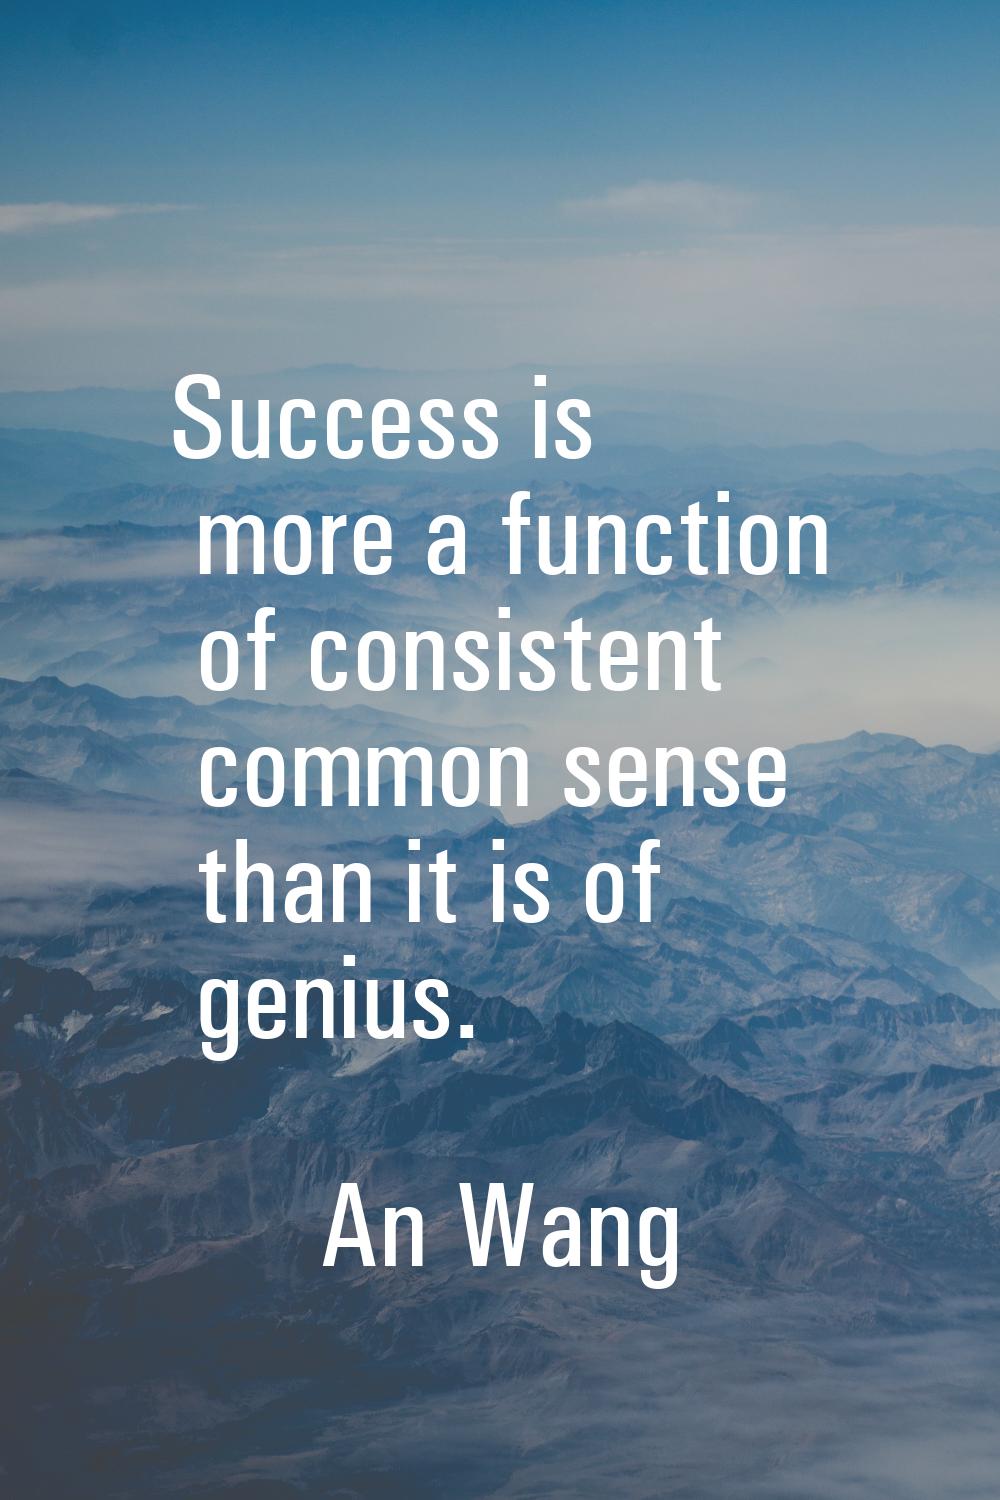 Success is more a function of consistent common sense than it is of genius.